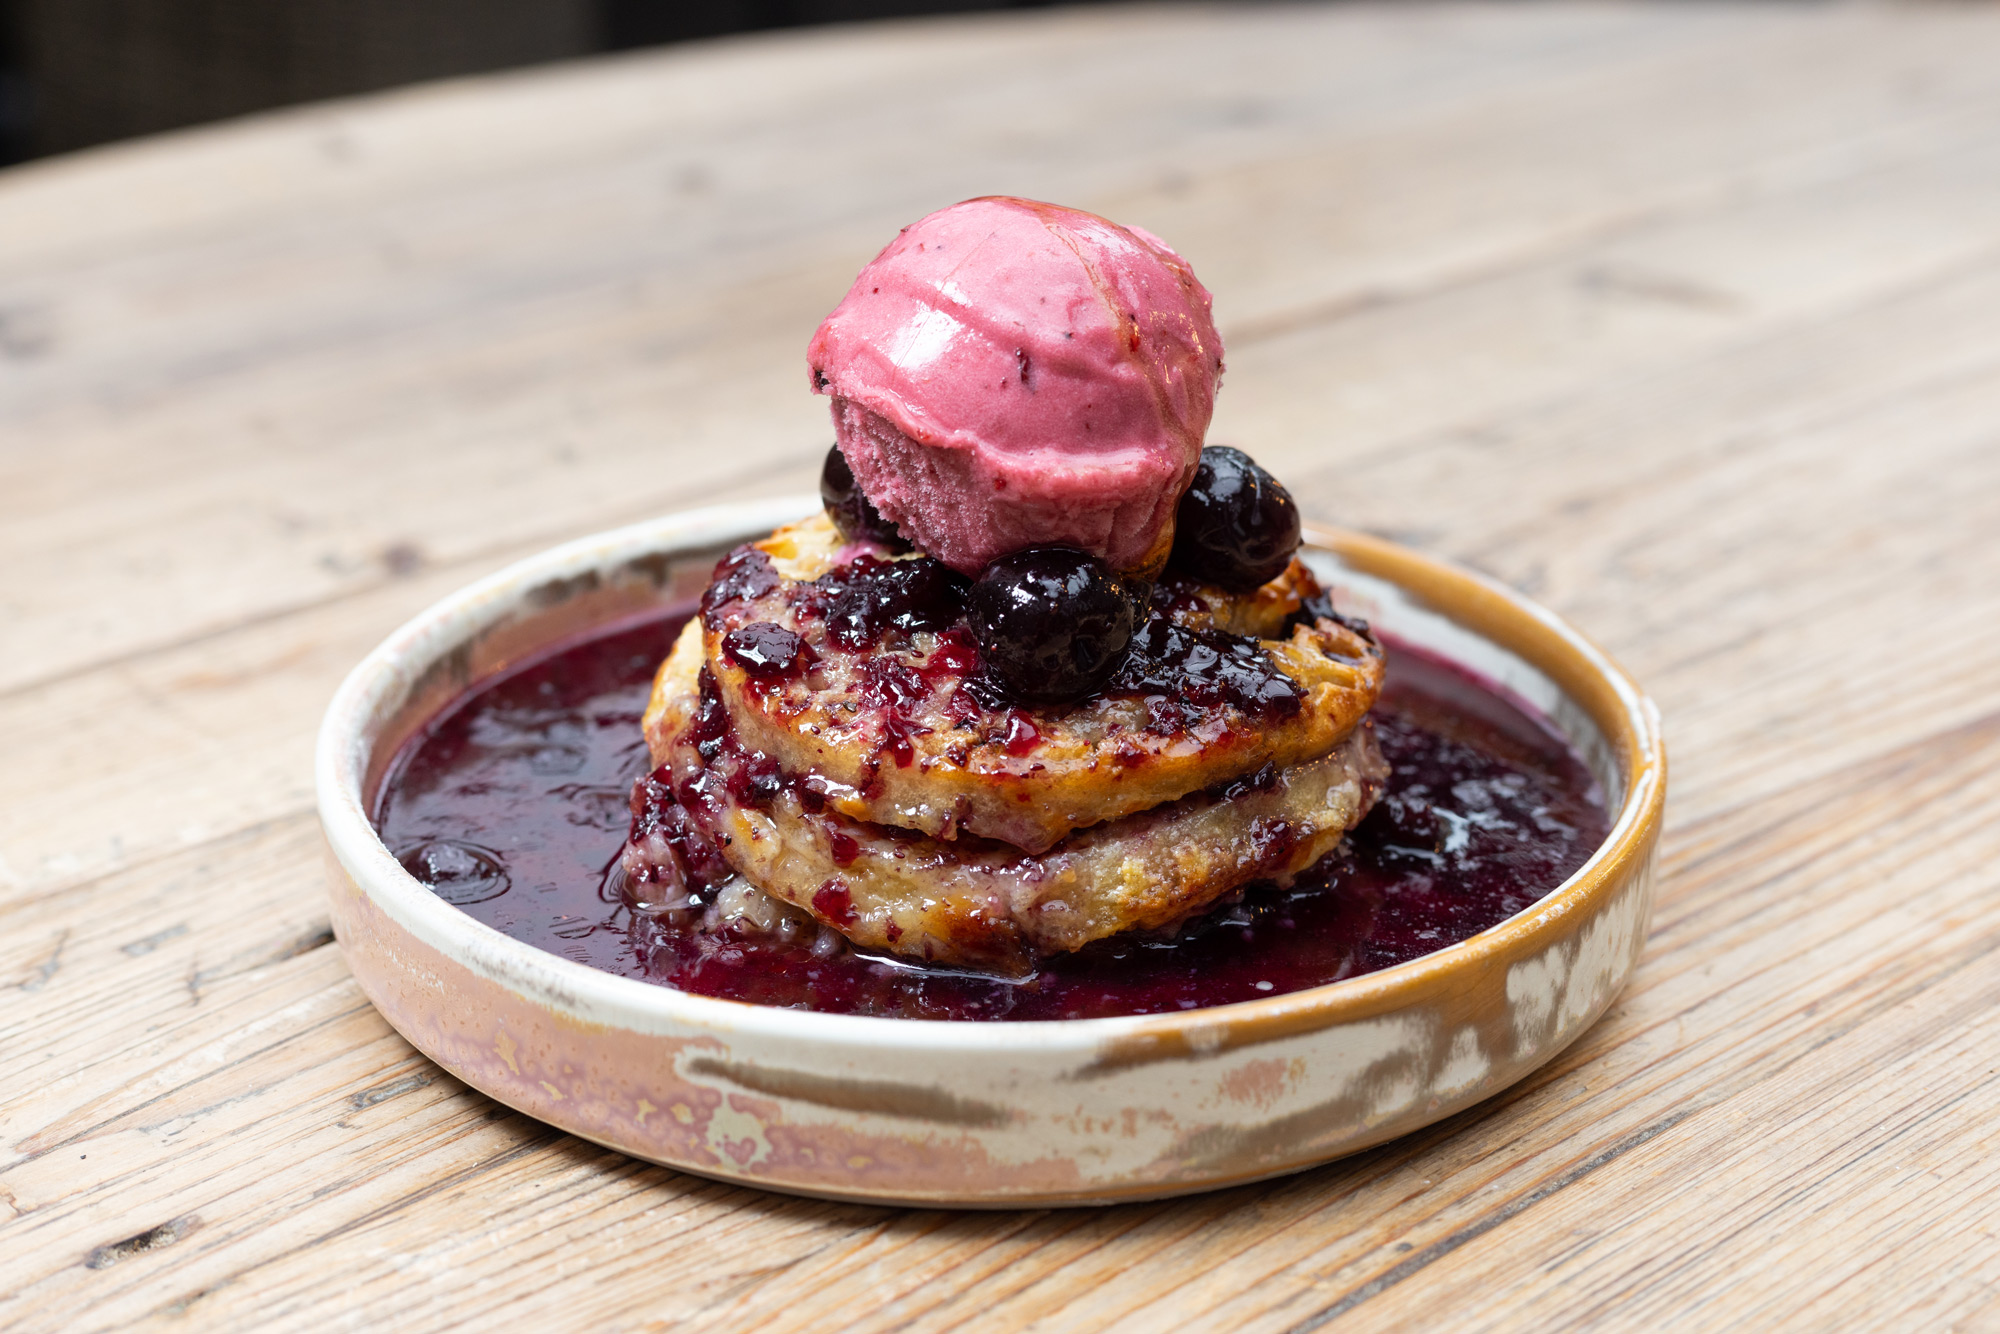 Side on photograph of a crumpet and  strawberry sorbet food dessert, plate is on a wooden table in a beige coloured plate. with black cherries topped with the sorbet. Food photography Aberdeen by Scott Cameron Baxter